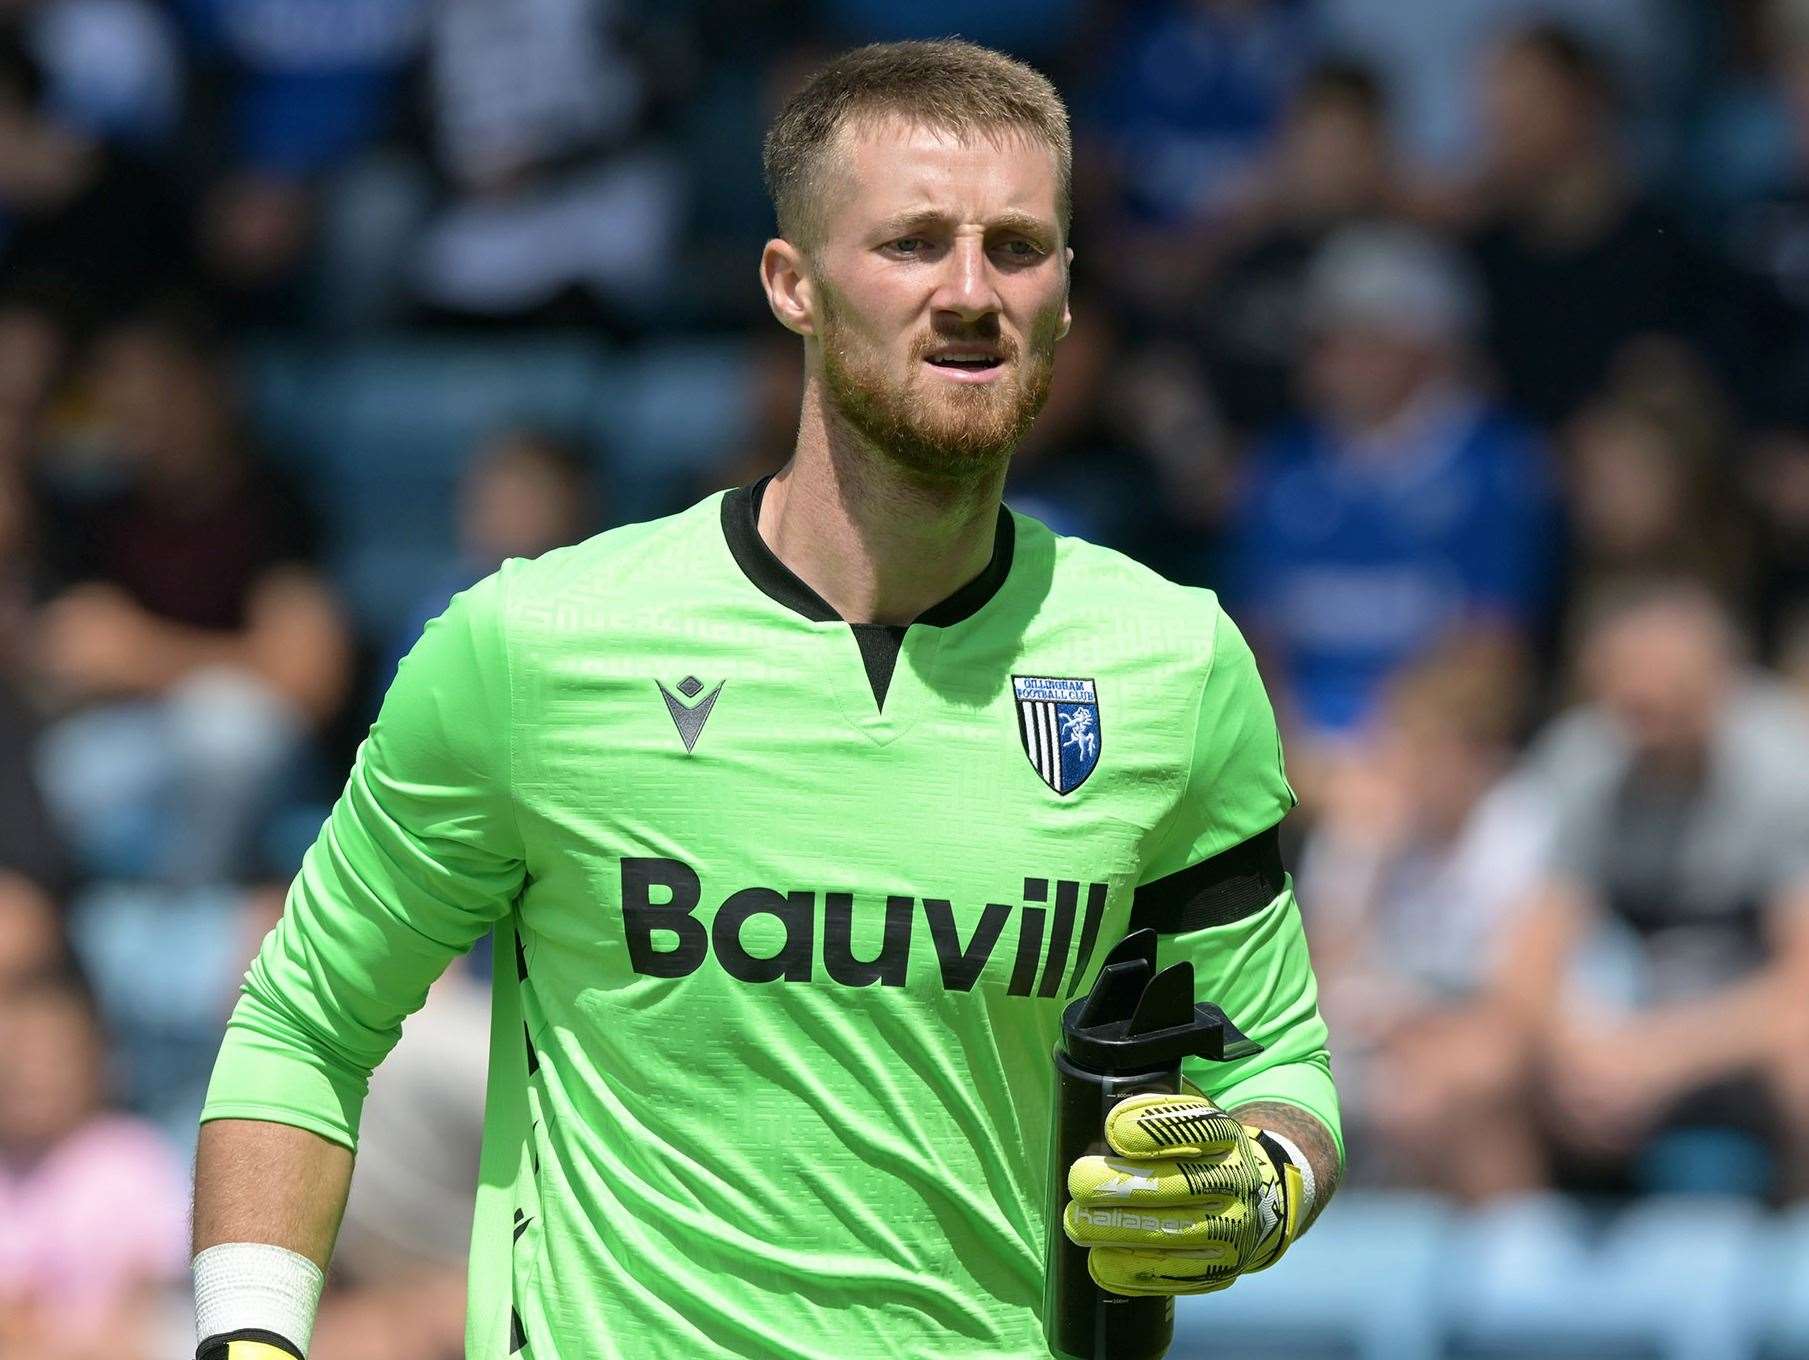 Gills goalkeeper Jake Turner played the full 90 minutes and kept a clean sheet. Picture: Keith Gillard